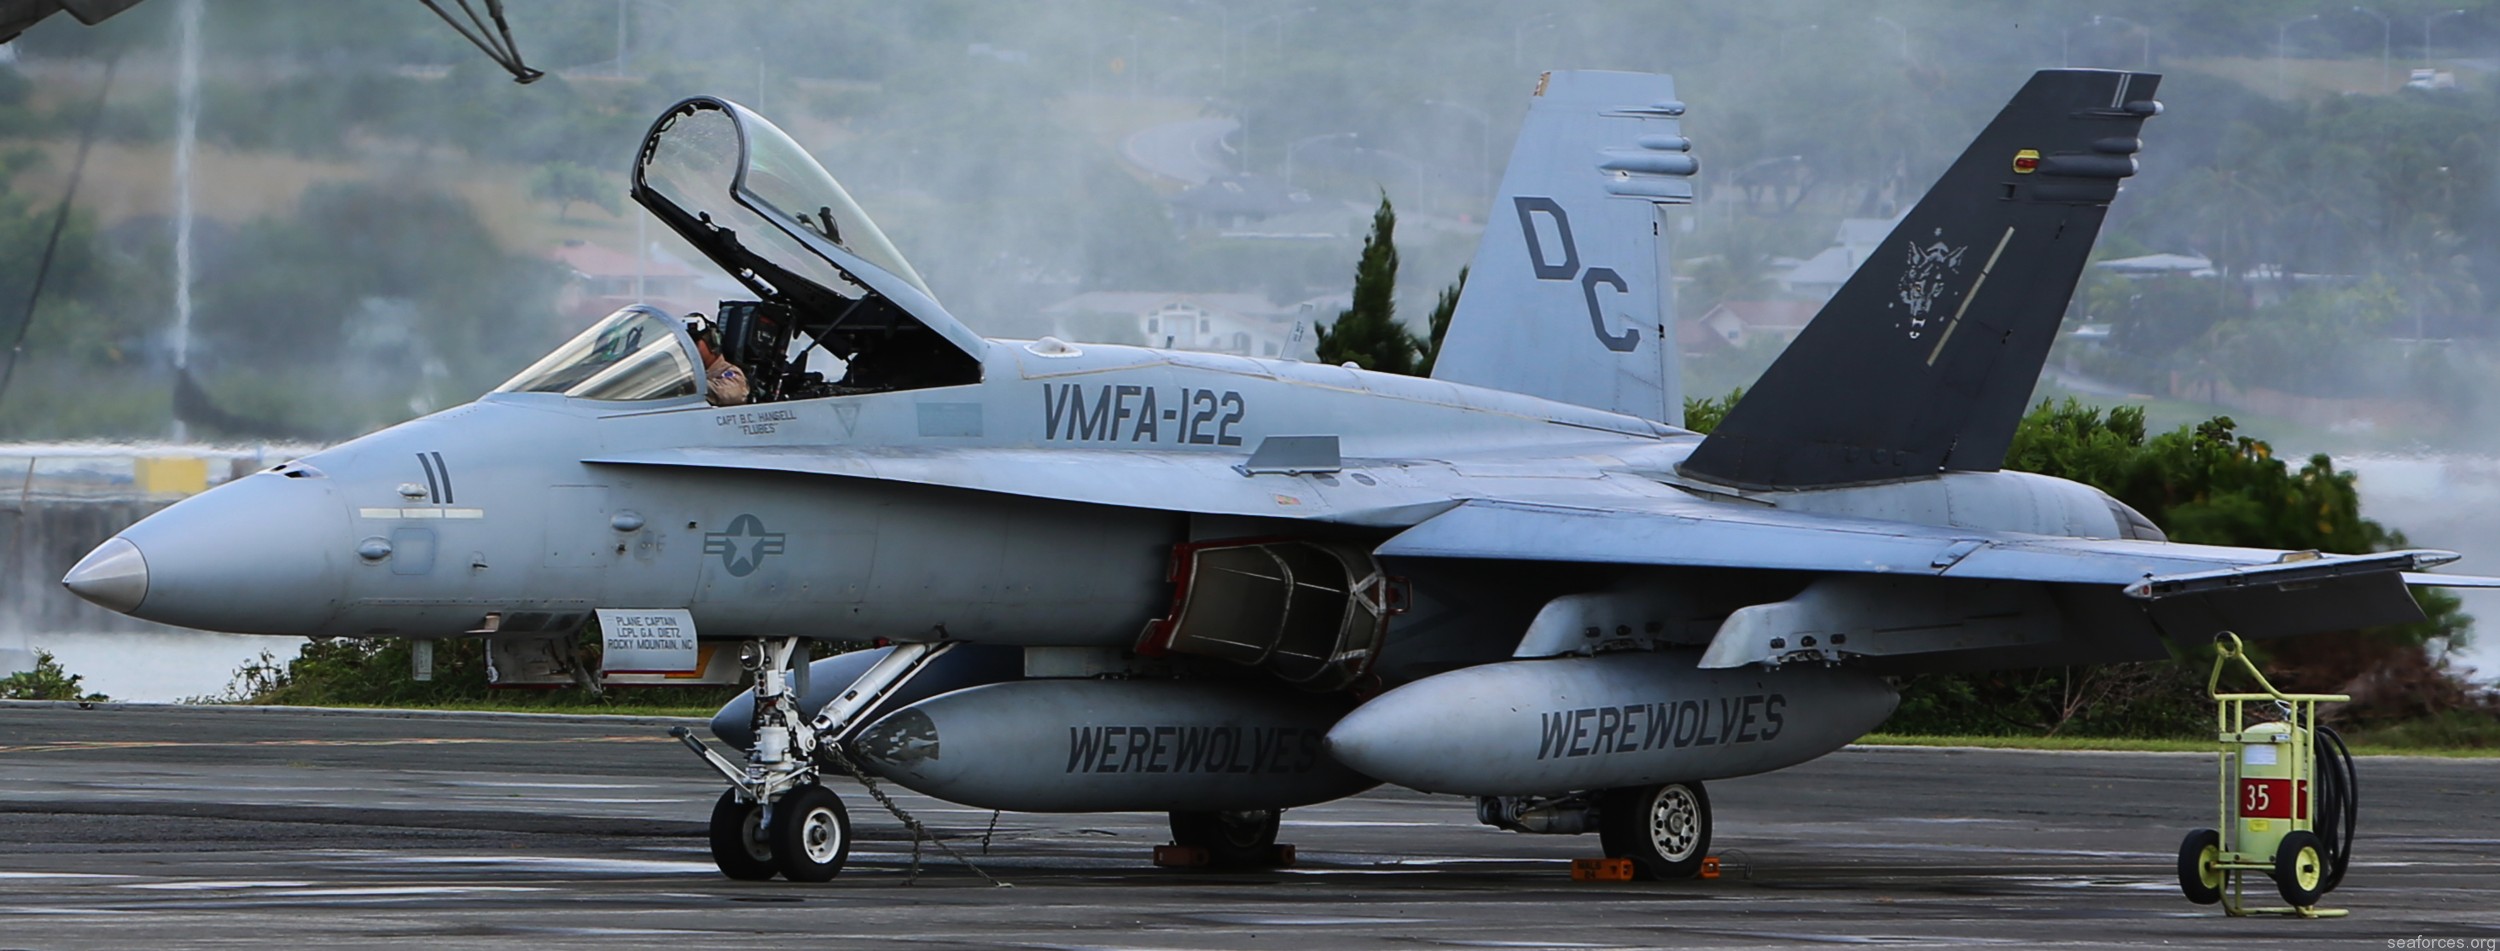 vmfa-122 werewolves f/a-18c hornet marine fighter attack squadron 04 mcb hawaii kaneohe bay